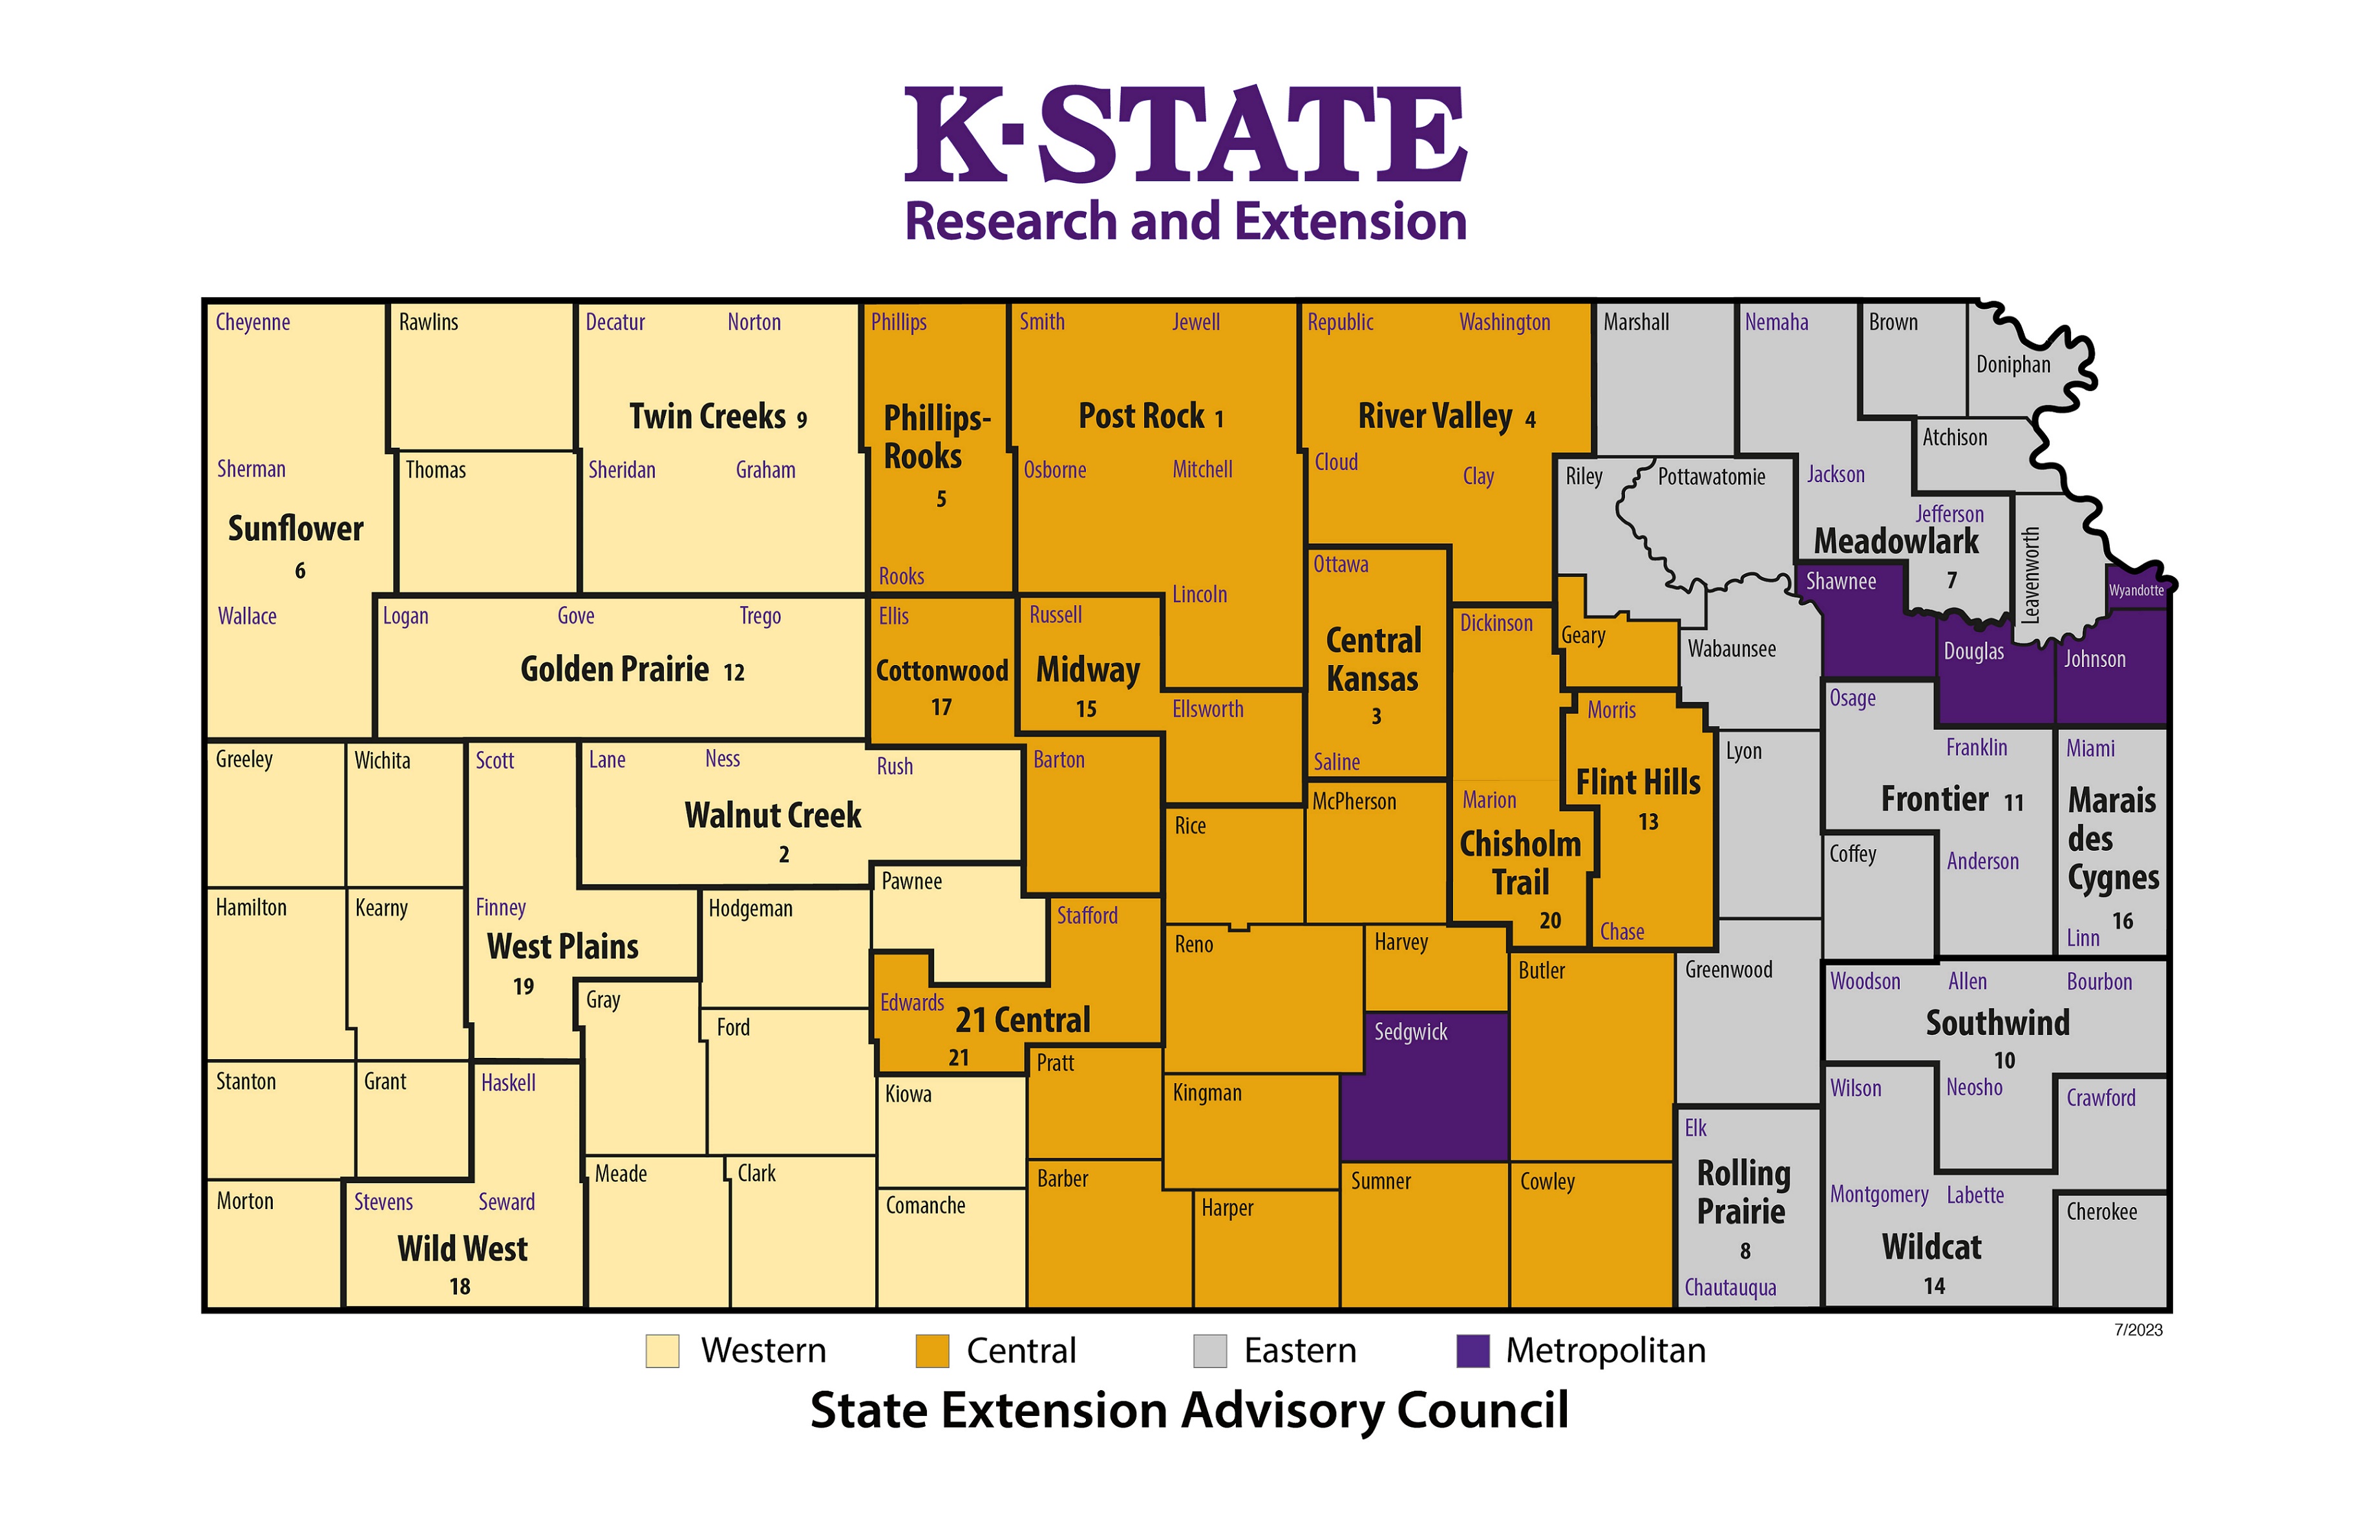 K-State Research and Extension local unit map, highlighting the SEAC regions: Western, Central, Eastern, and Metropolitan